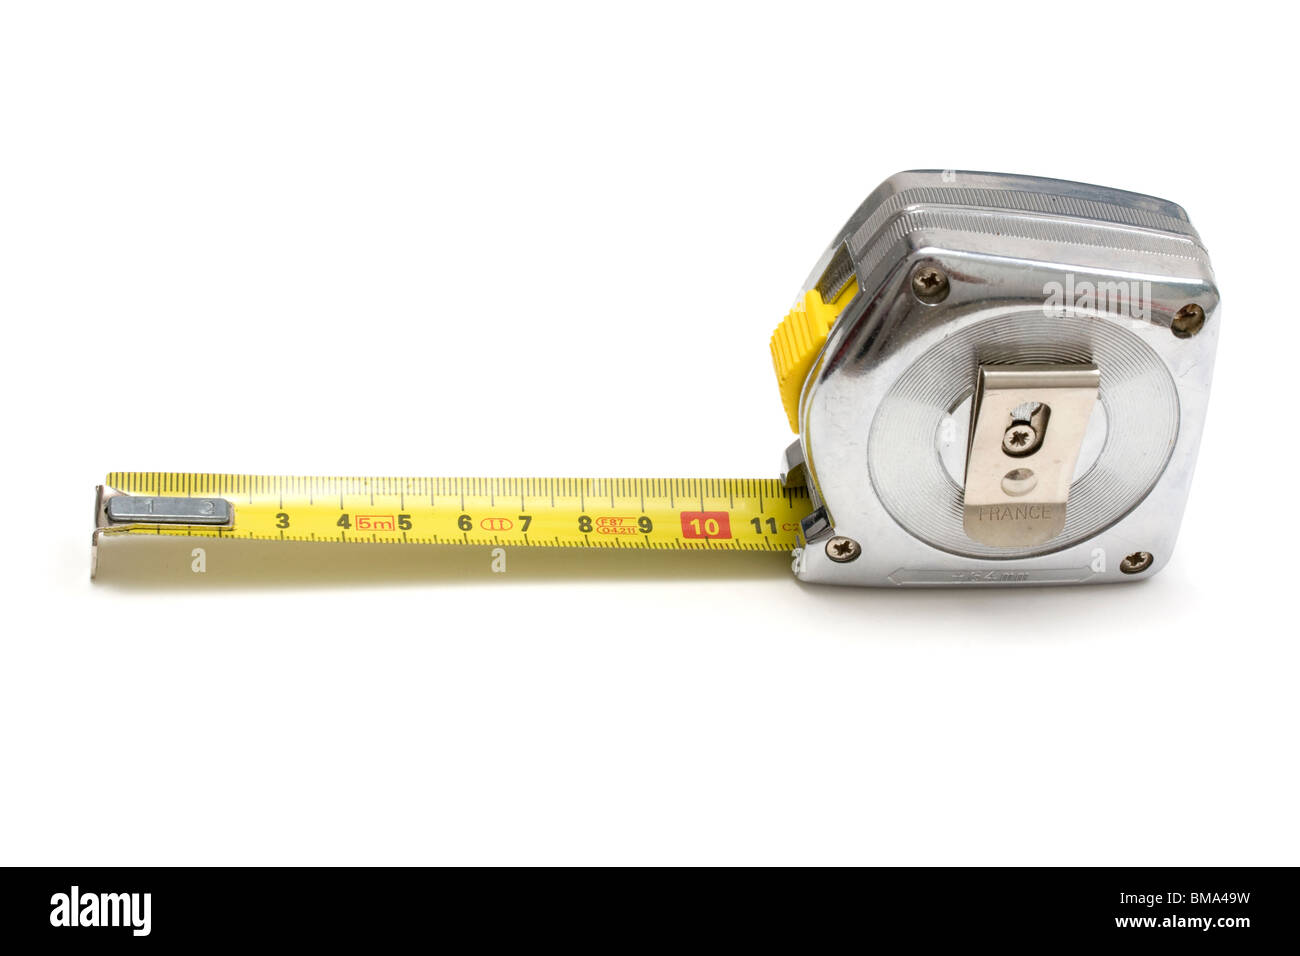 Tape measure isolated on white background Stock Photo